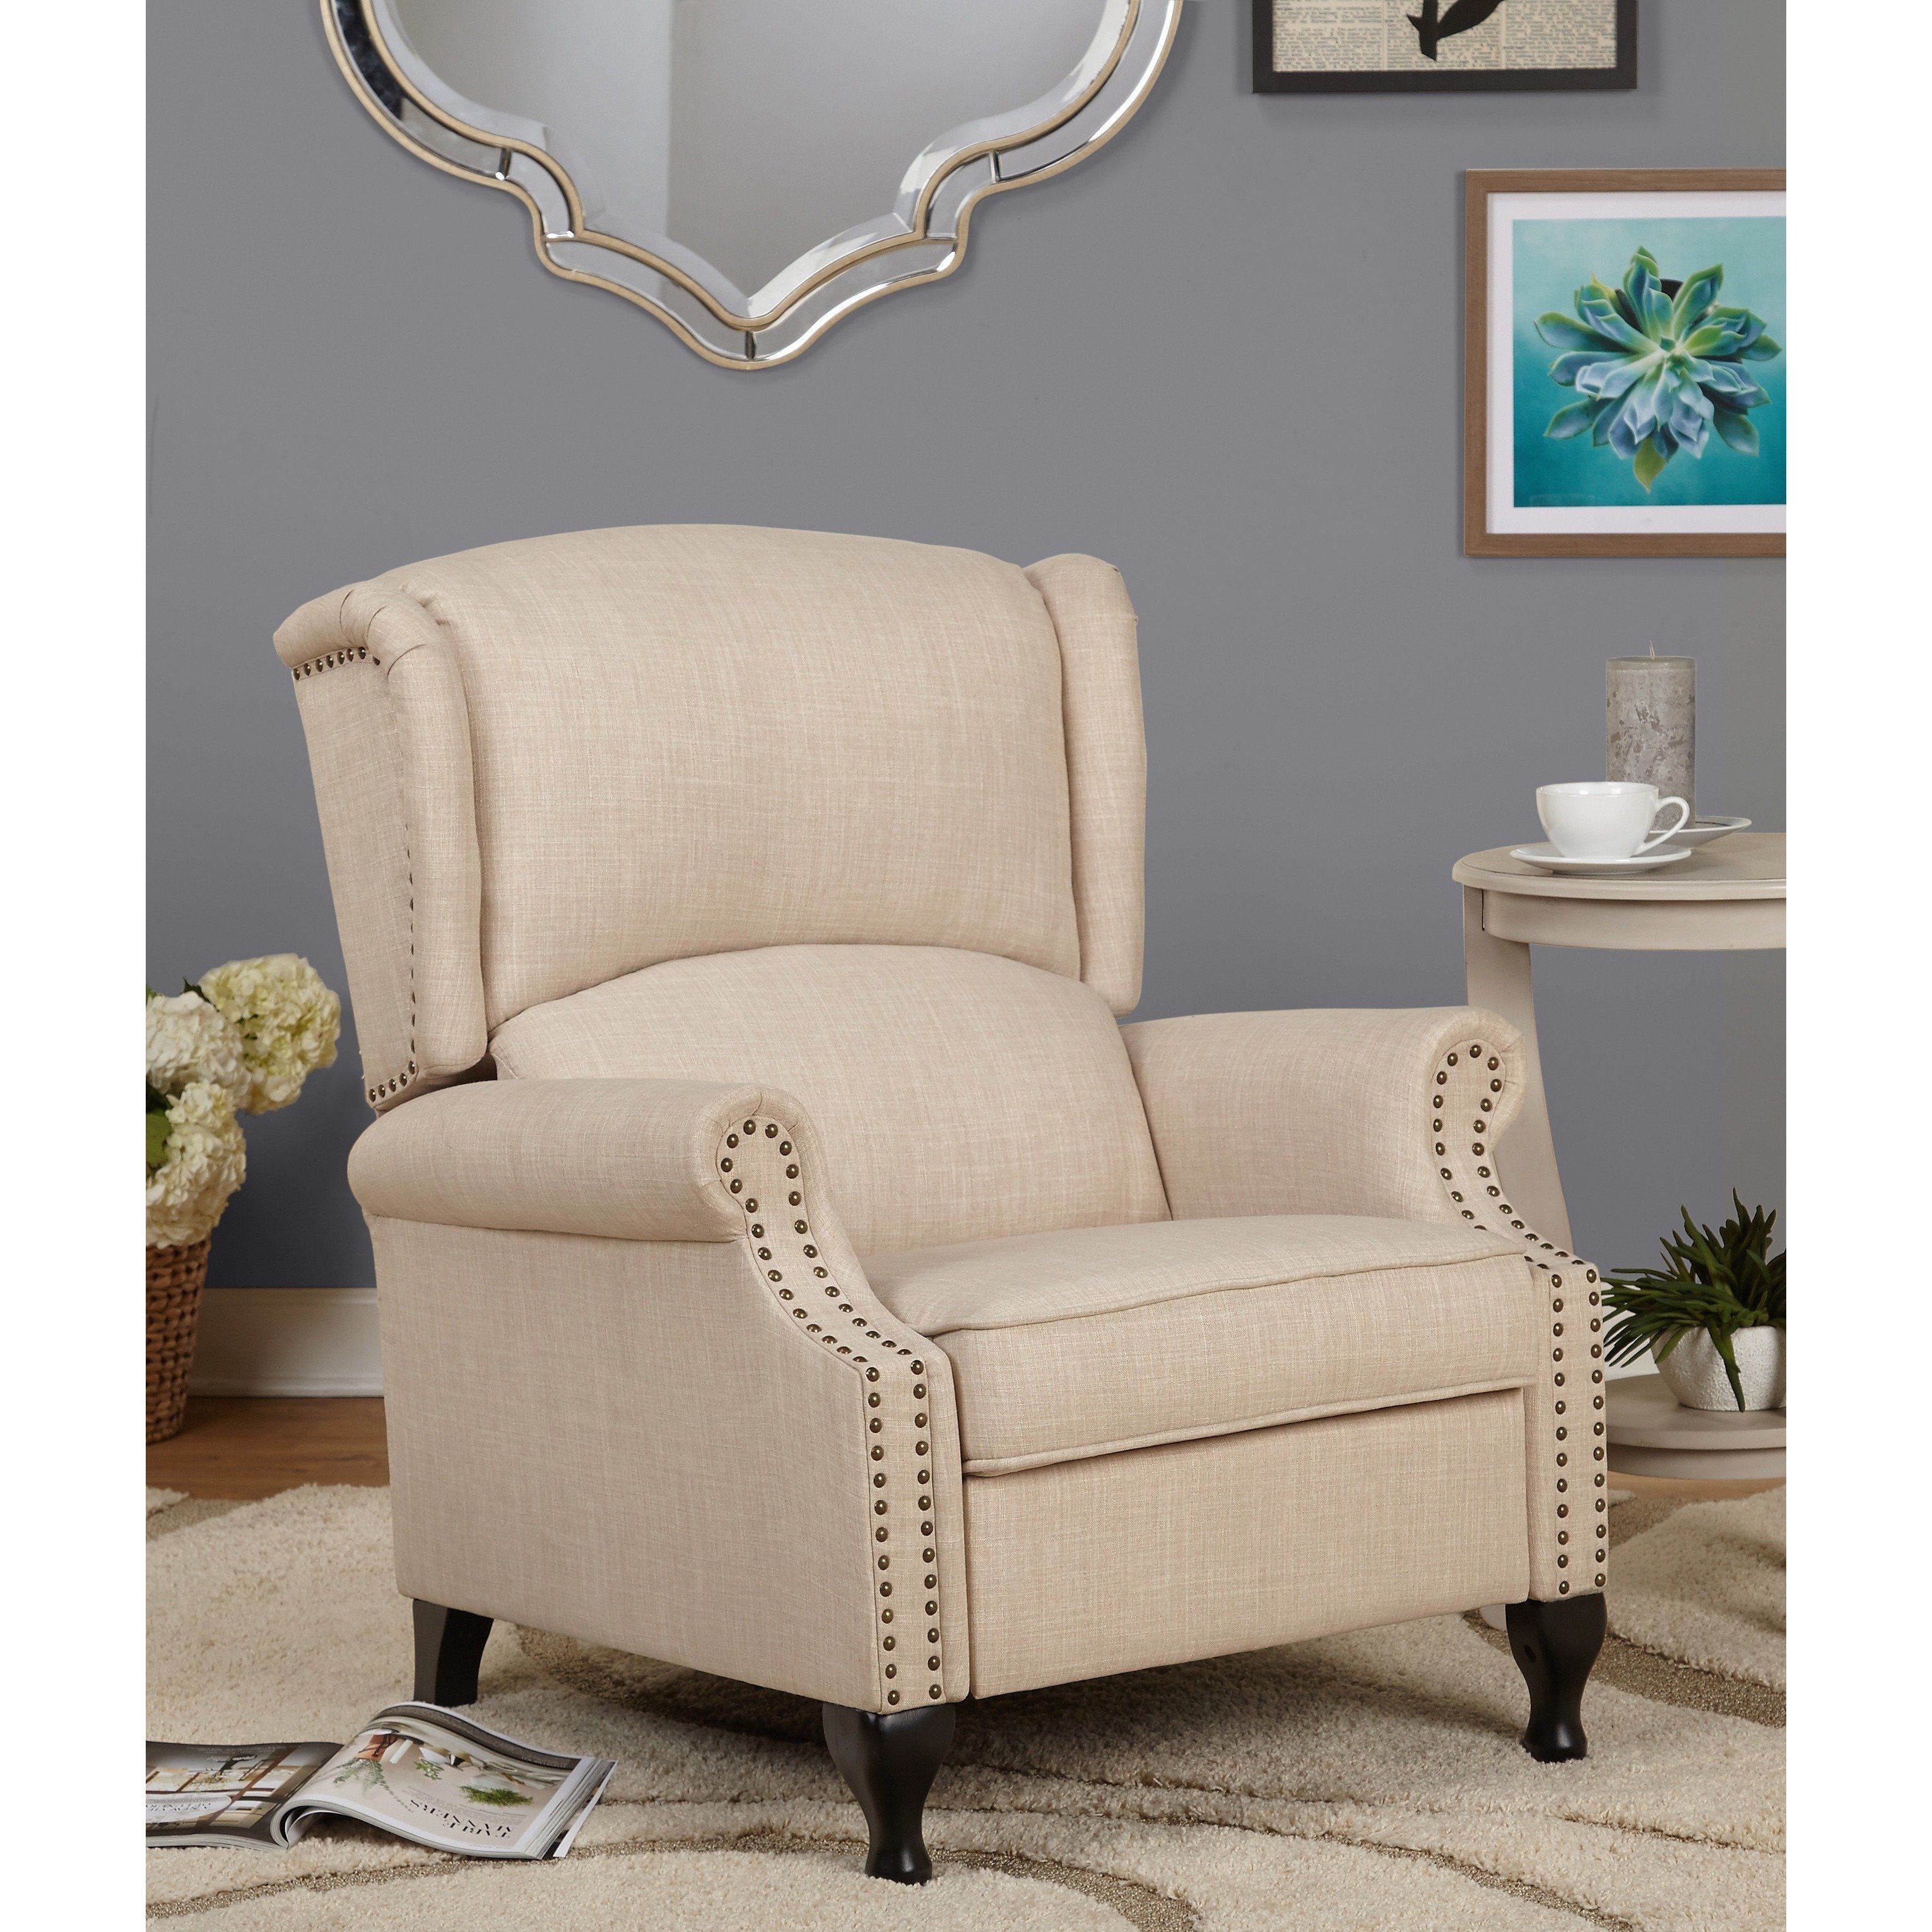 Shop Simple Living Upholstered Wing Recliner – Free Shipping Today With Regard To Franco Iii Fabric Swivel Rocker Recliners (View 15 of 20)